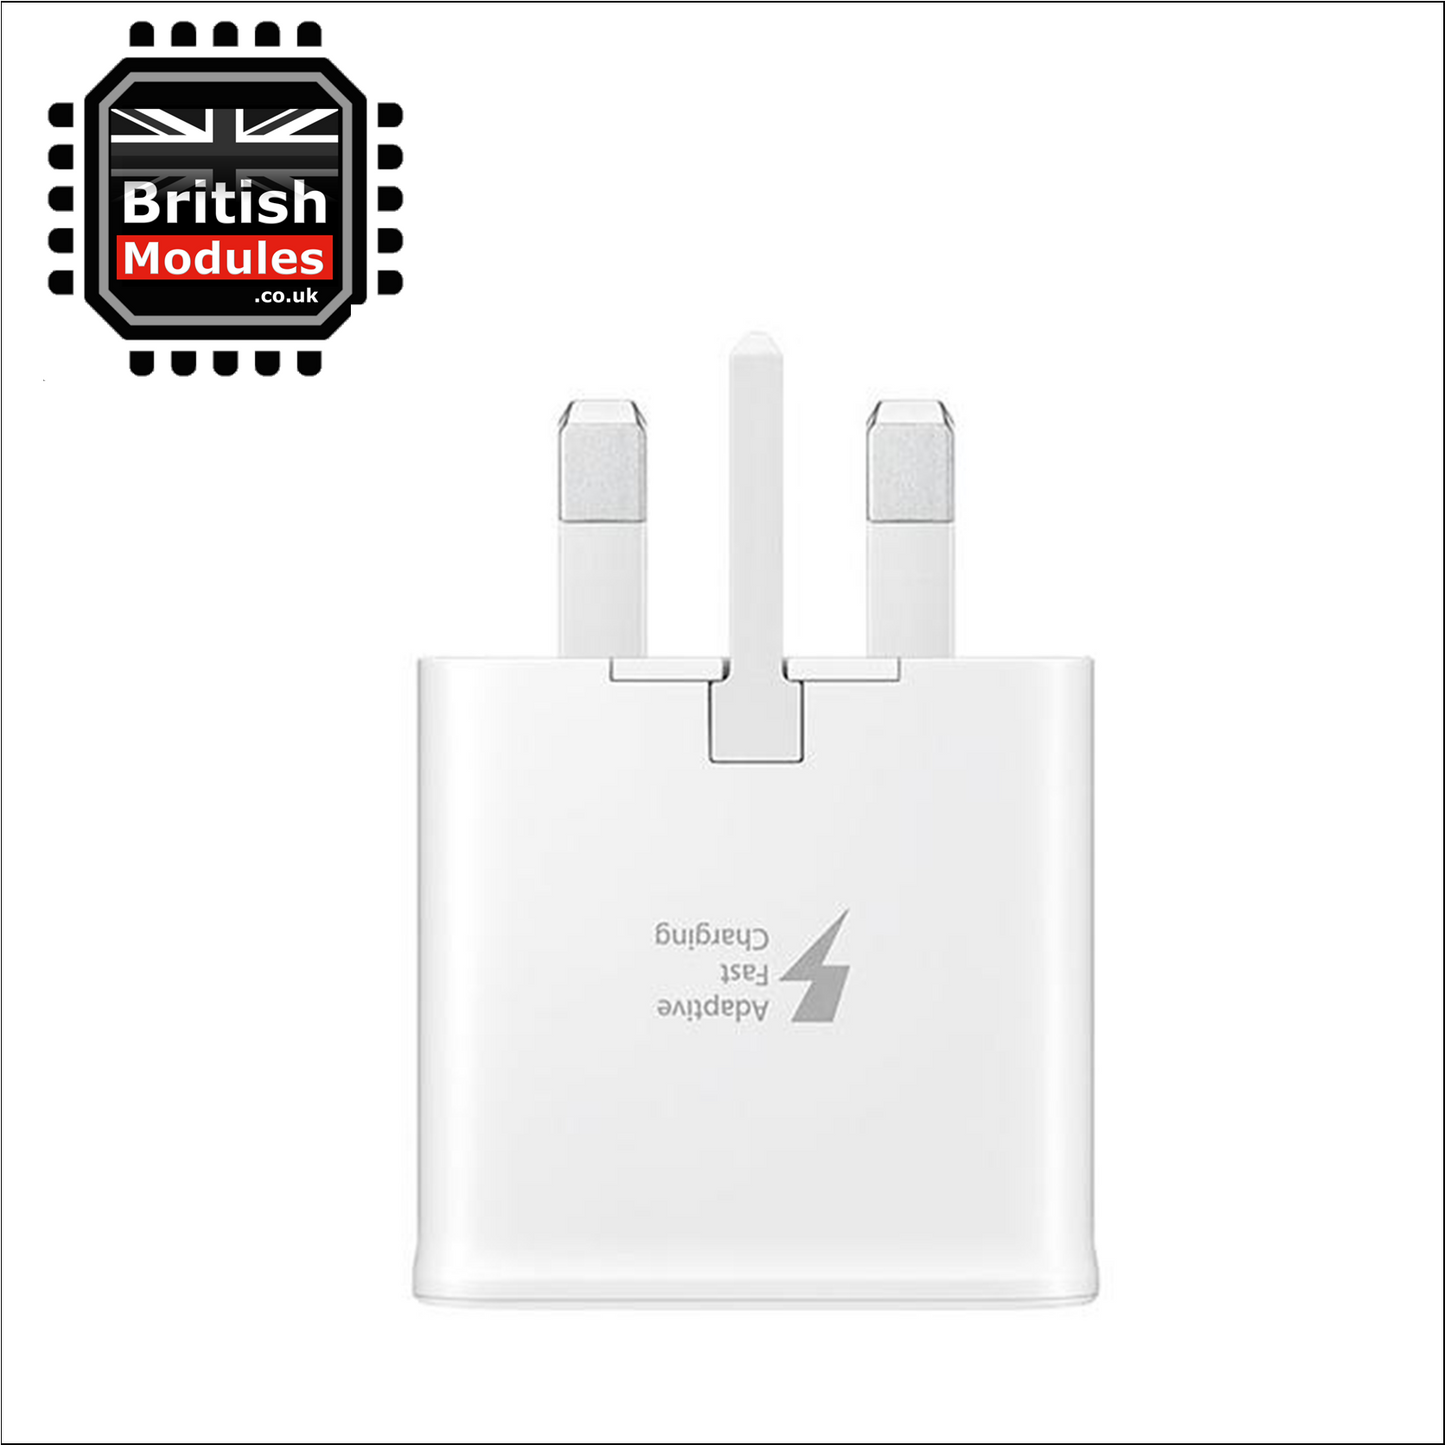 Samsung Galaxy Adaptive Fast Charging Mains UK Charger Plug Wall Power Adapter S10e S10 S10+ Note9 S9 S9+ Note8 S8 S8+ S7 Note5 S6 S6+ edge